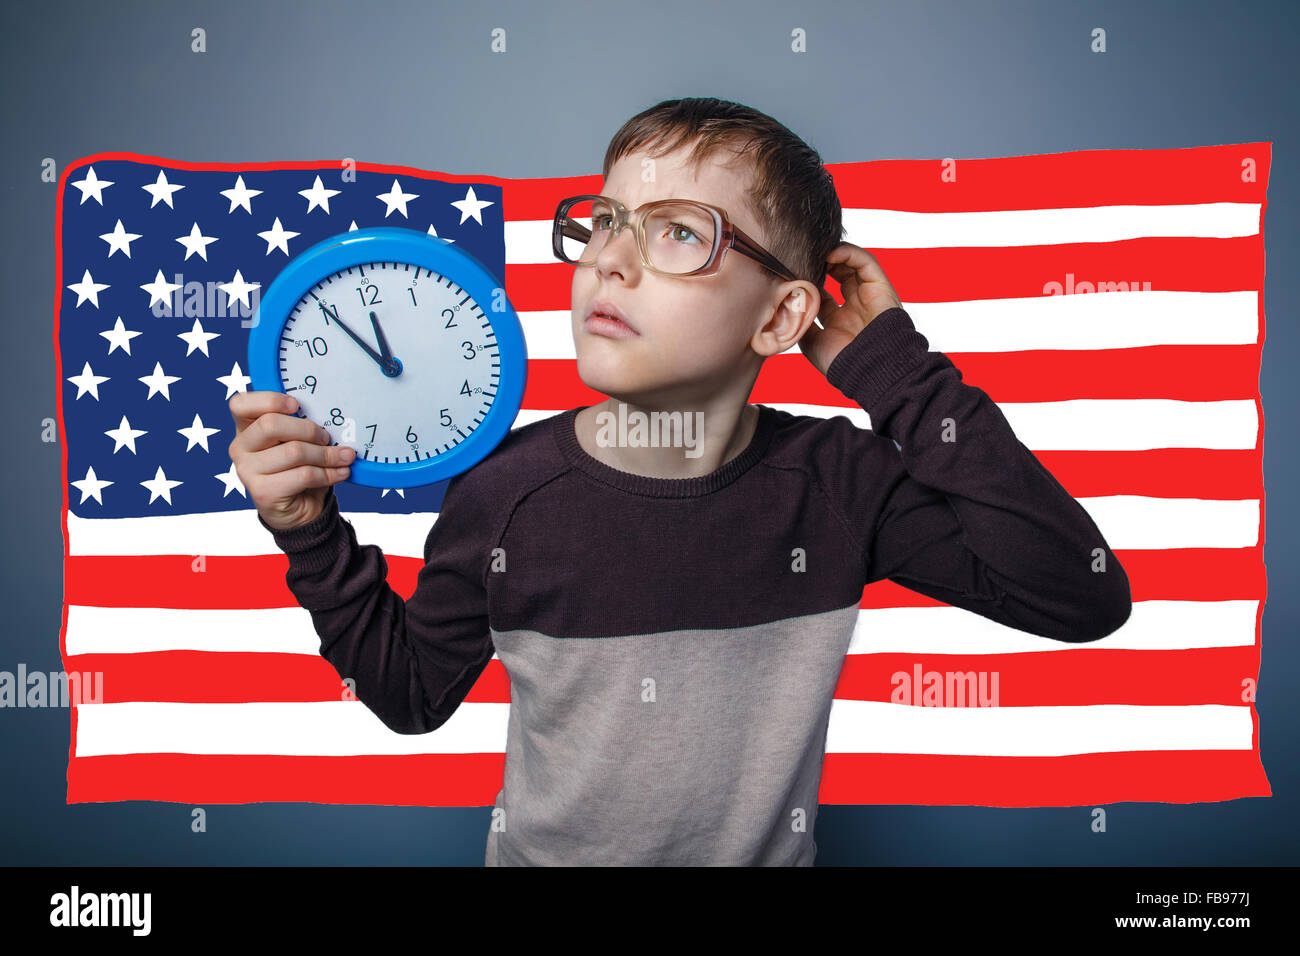 adolescent the boy wearing glasses and holding an American flag Stock Photo